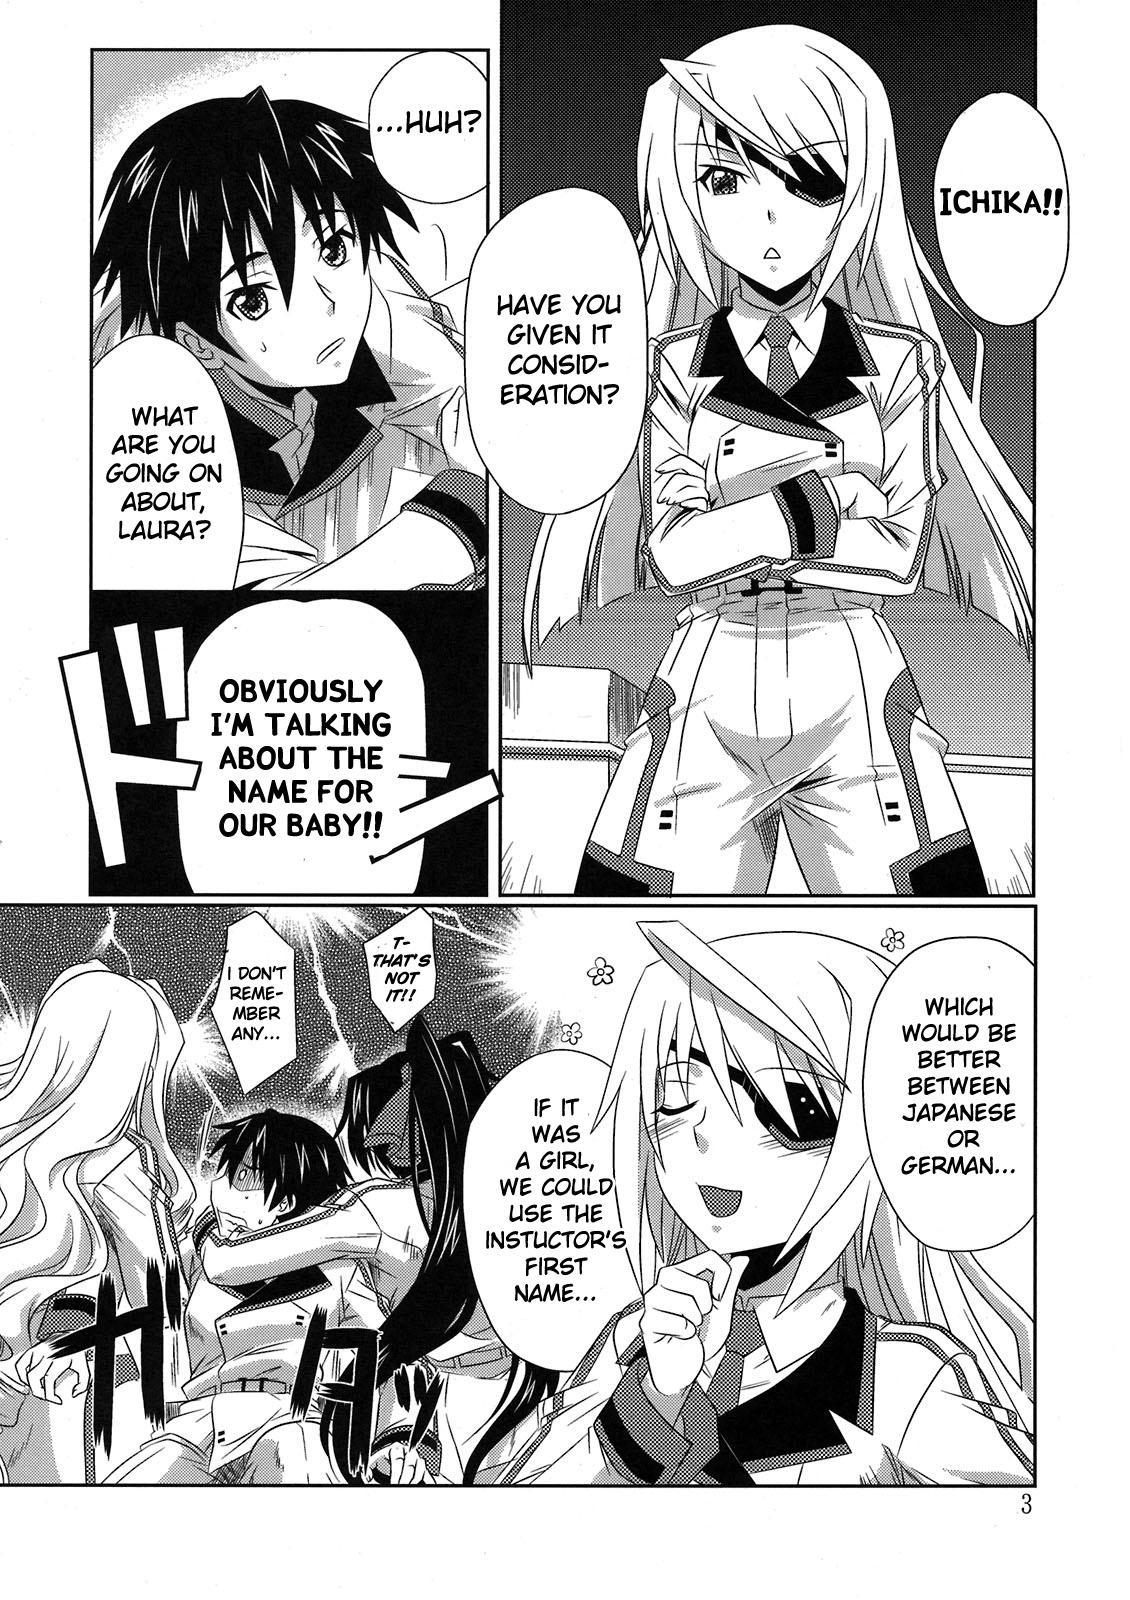 Women Sucking Dicks is Incest Strategy - Infinite stratos Arabic - Page 3